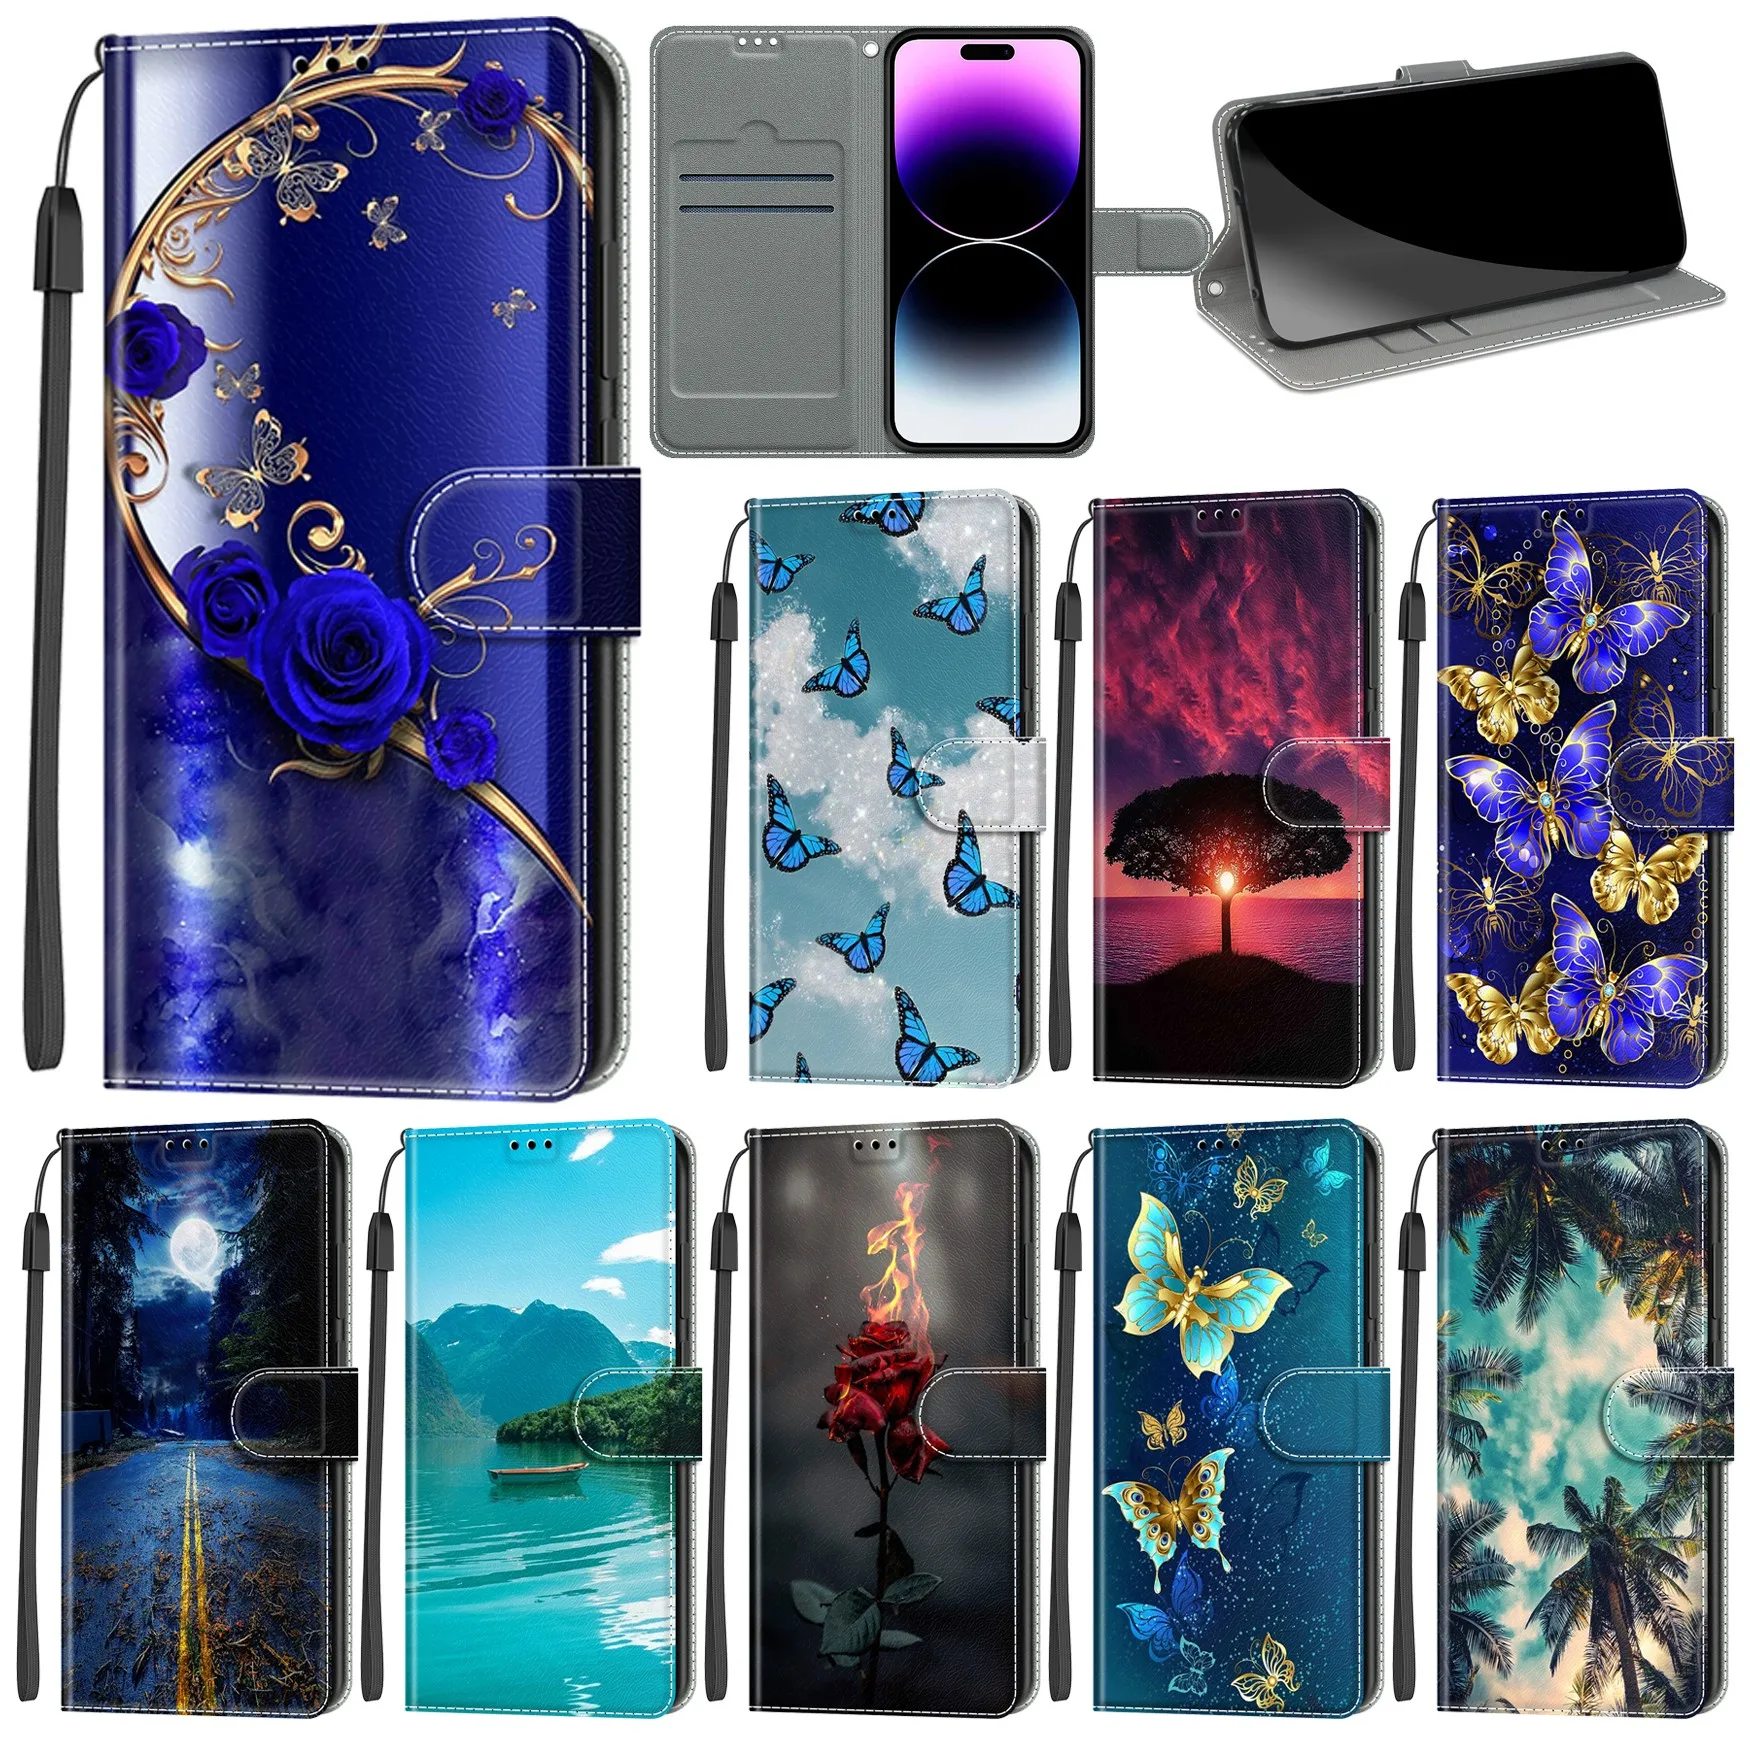 

Protect Leather Wallet Case For Samsung Galaxy S23 S22 S21 Ultra S20 FE S10 S10E S9 S8 S7 Note 10 Plus A8 Flip Cover Card Holder